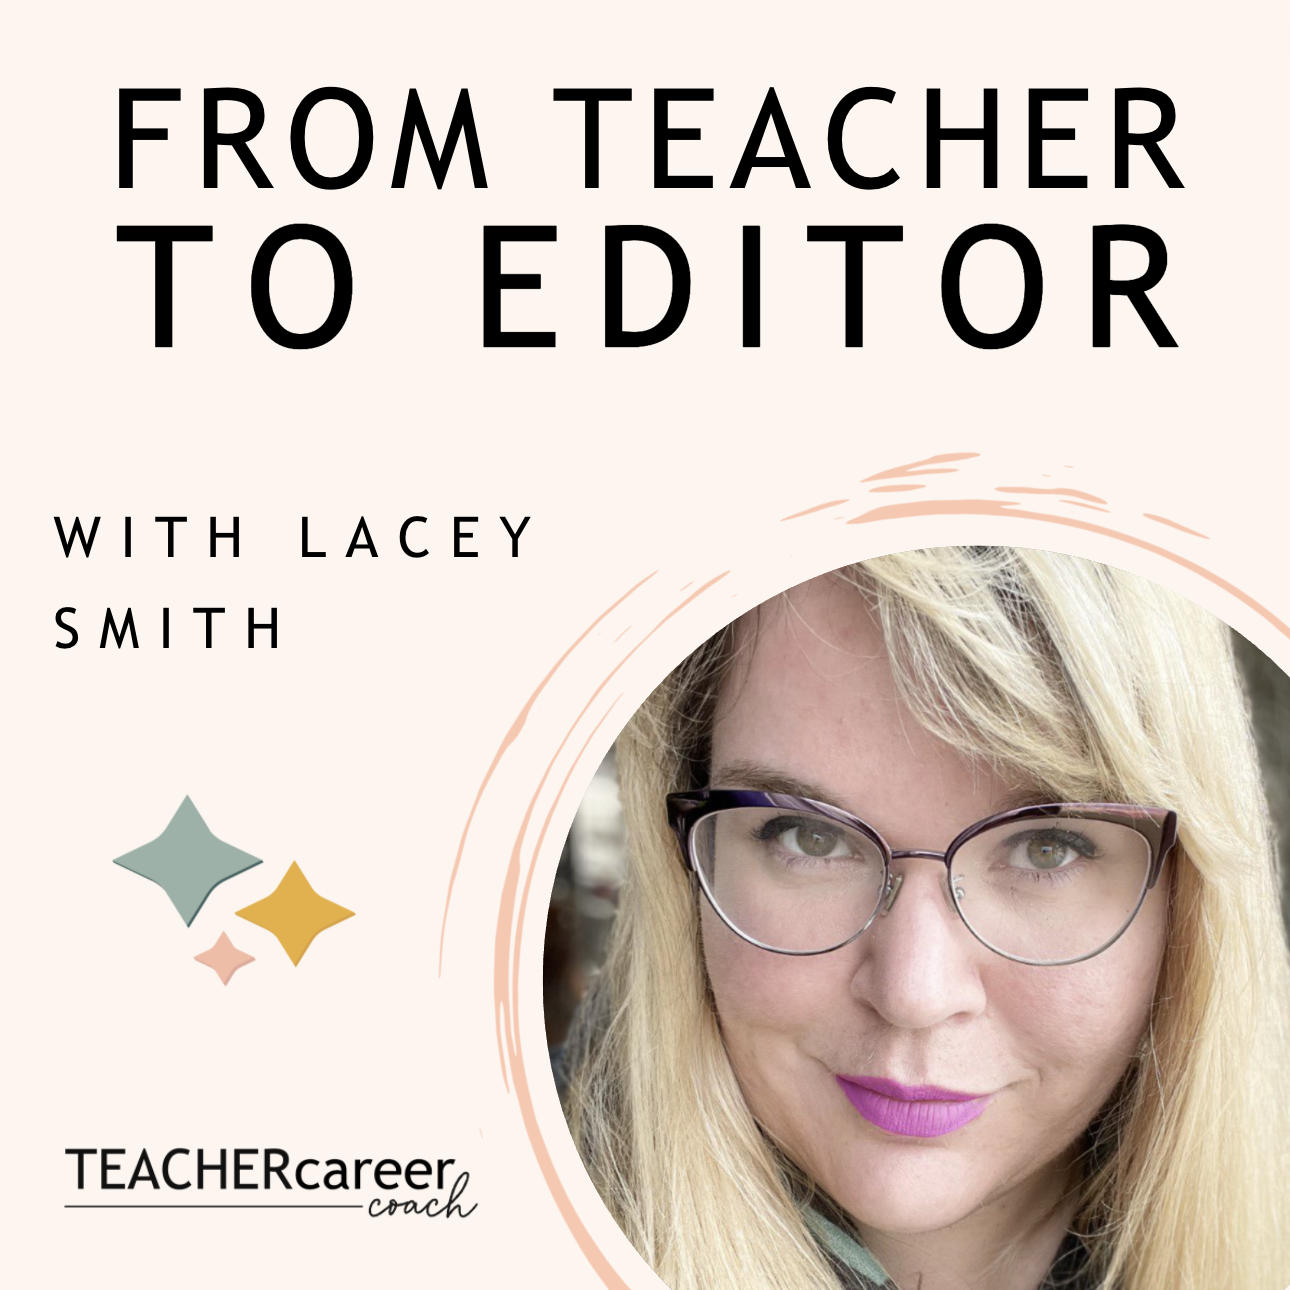 From Teacher to Editor